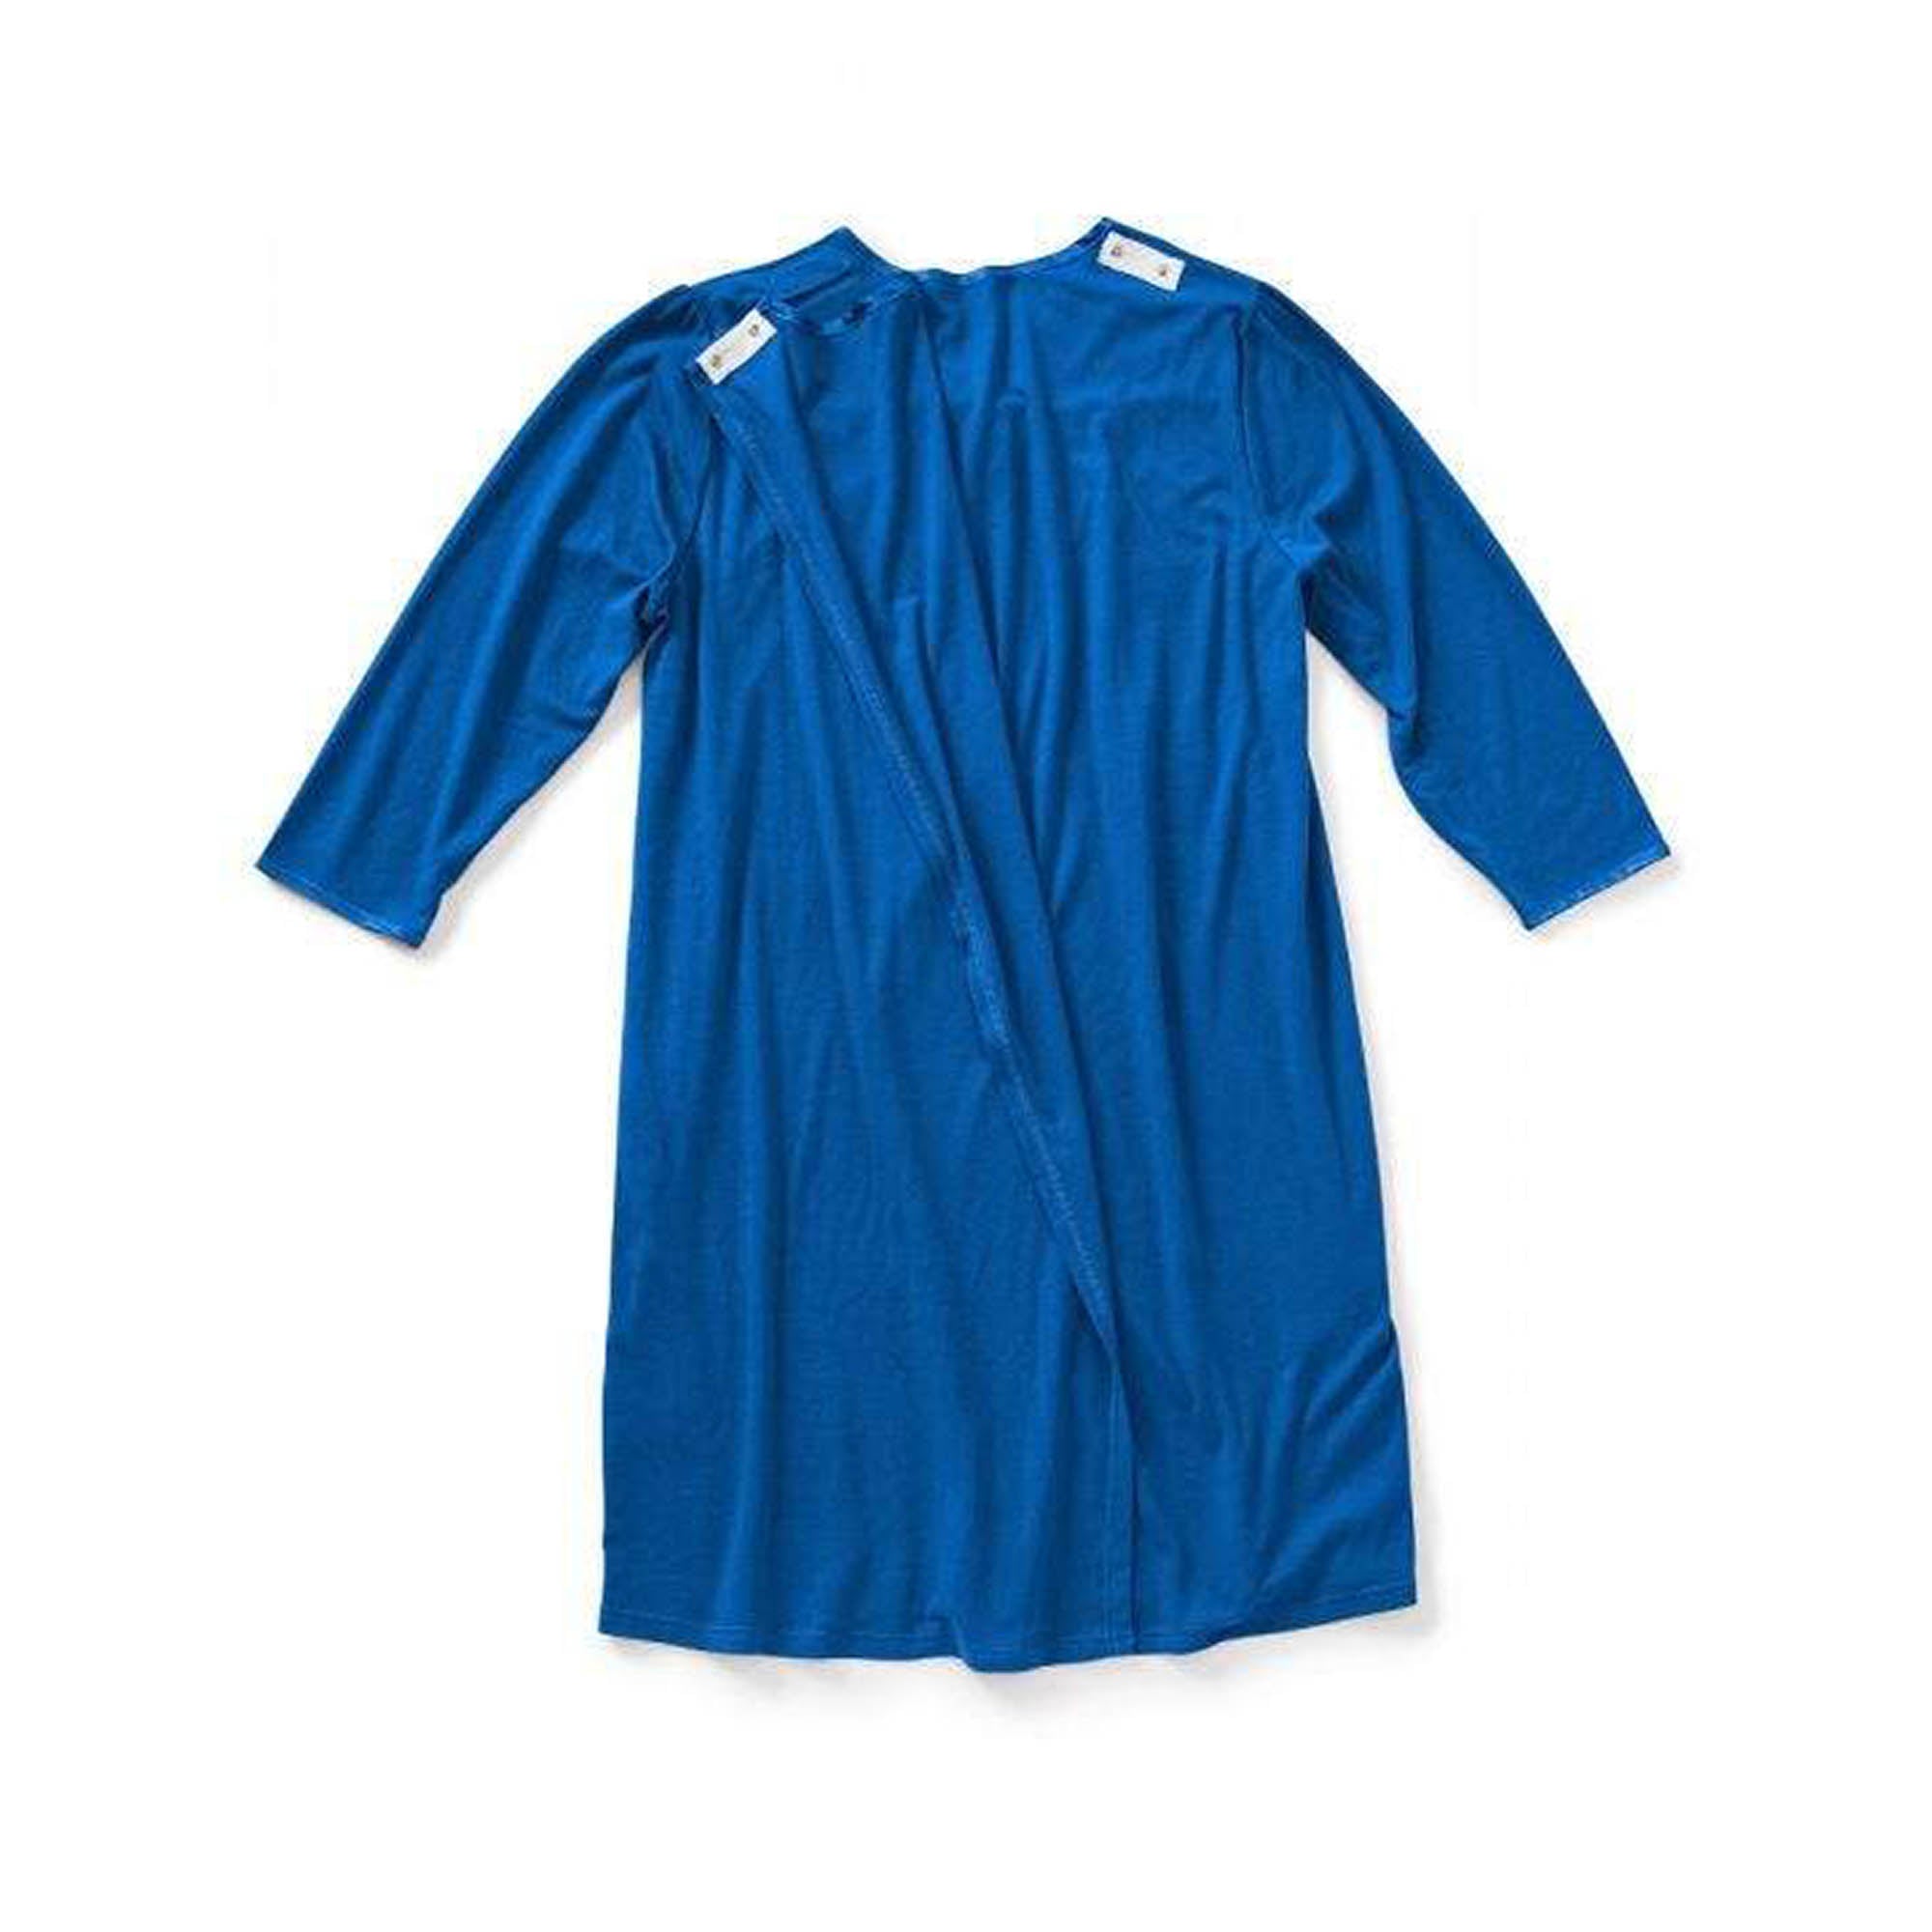 Silverts Women's Open Back Antimicrobial Long-sleeve Nightgown - Adaptive Clothing - Blue - XL